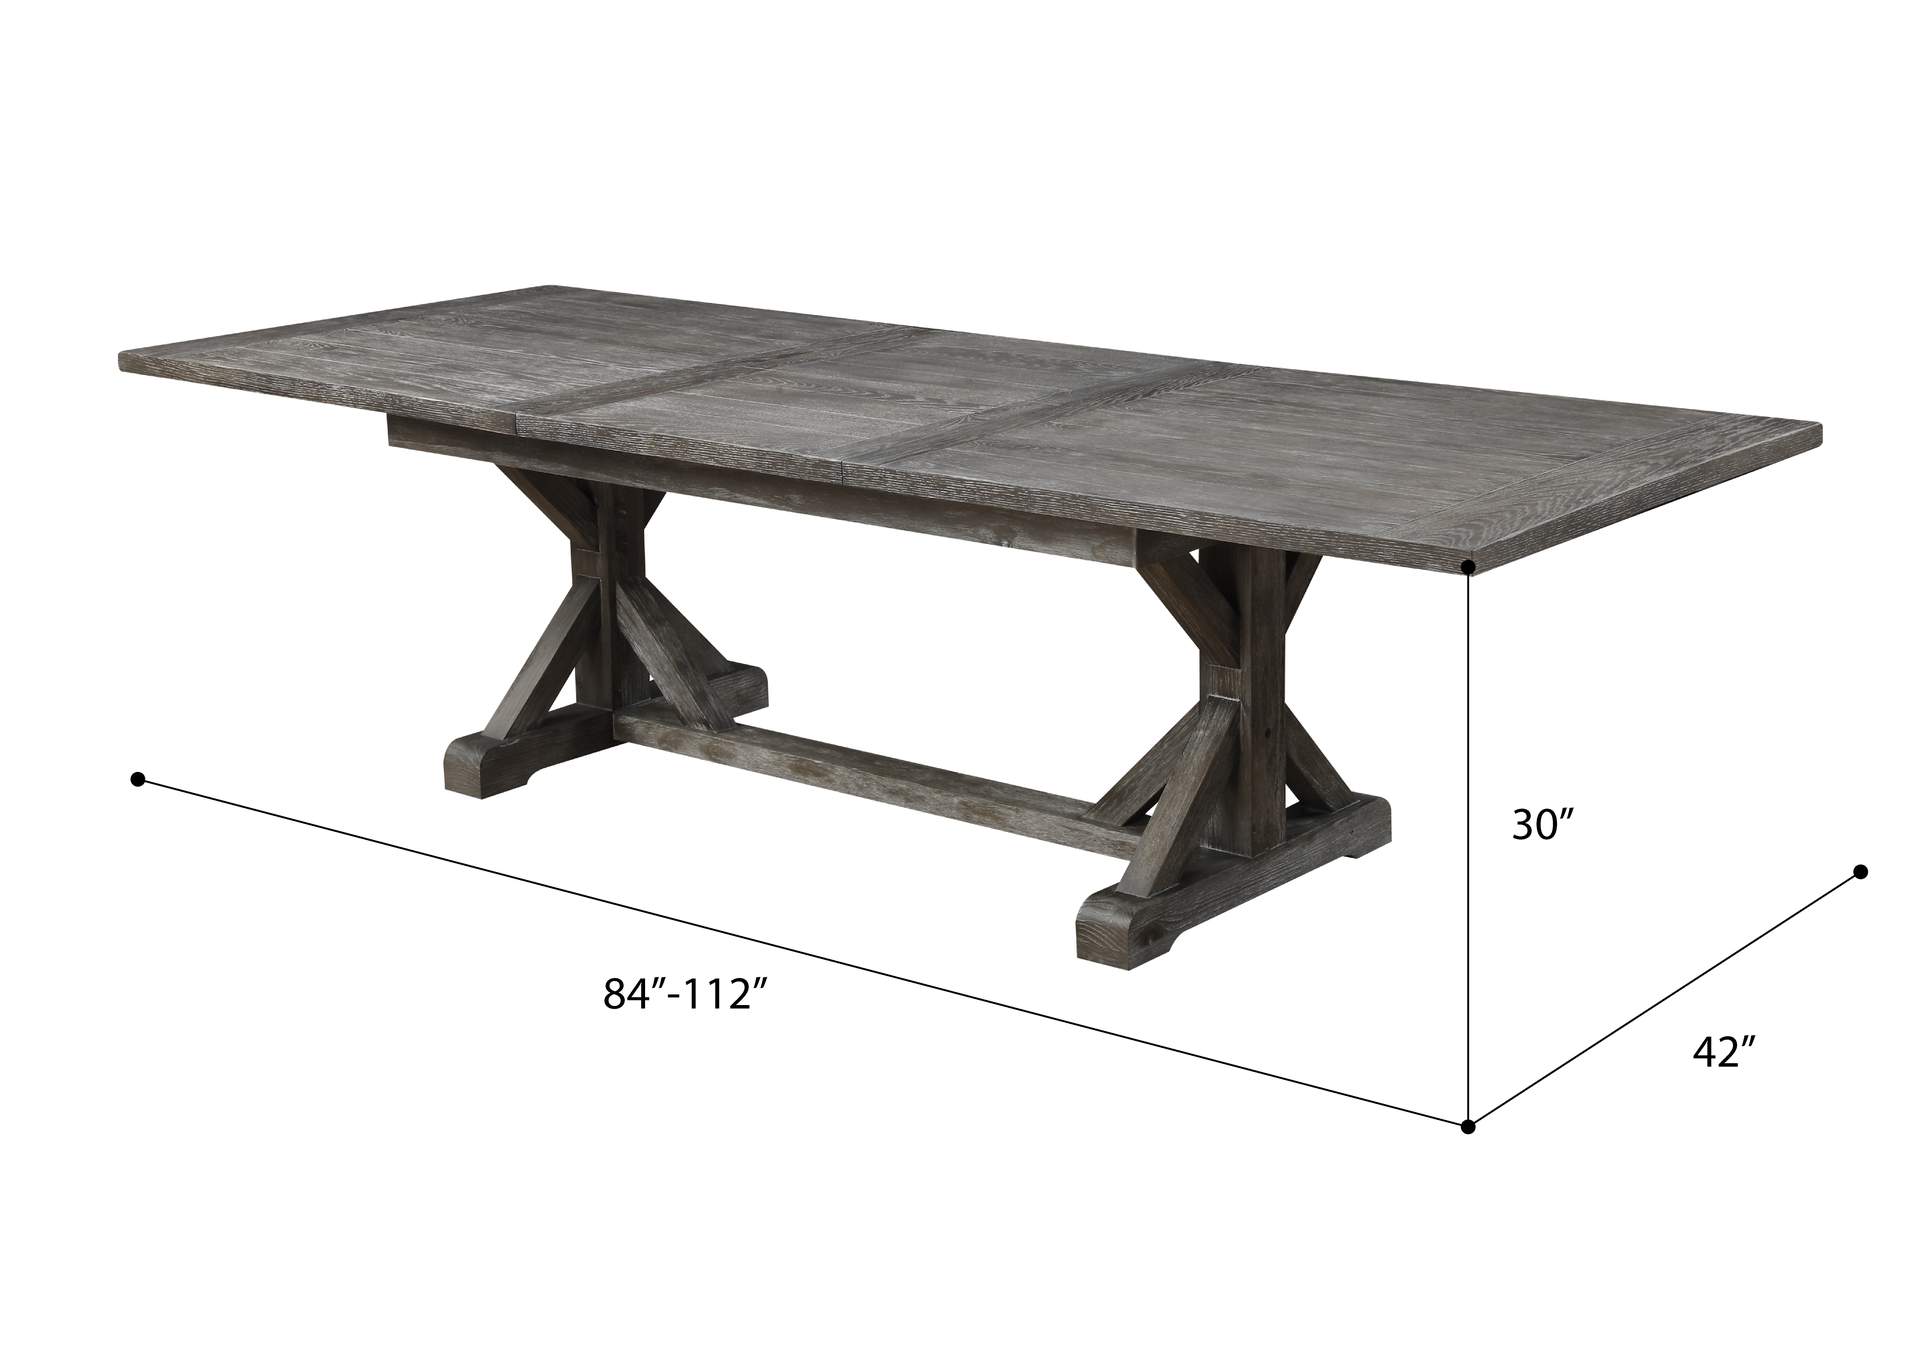 Paladin Butterfly Leaf Dining Table,Emerald Home Furnishings